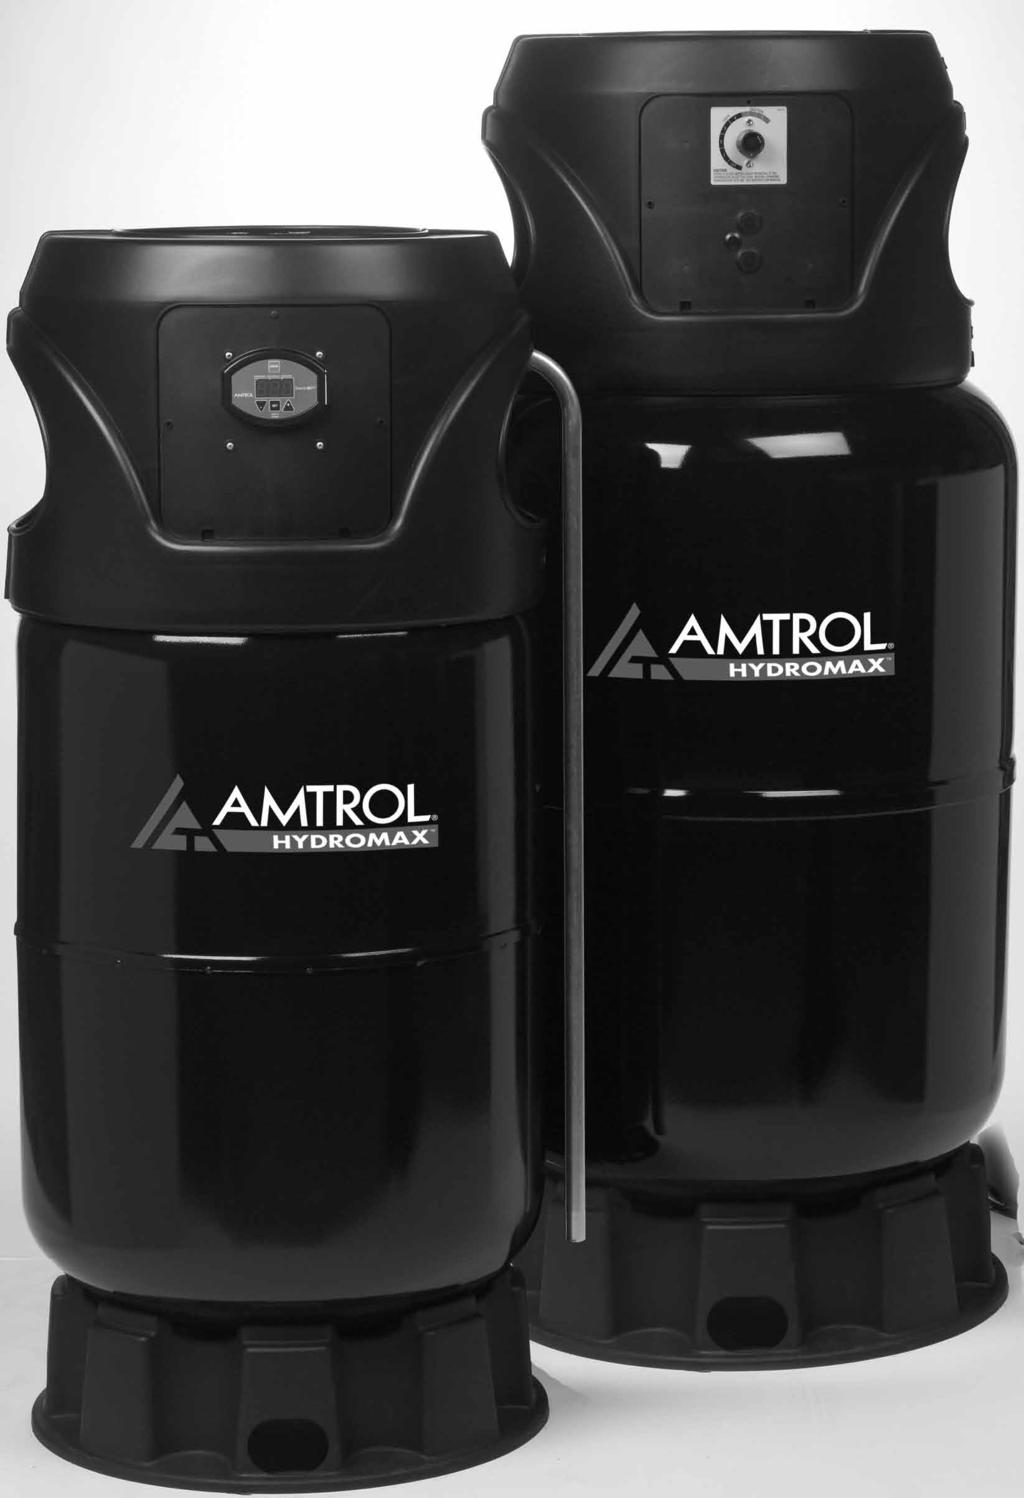 INSTALLATION & OPERATION INSTRUCTIONS HYDROMAX INDIRECT-FIRED WATER HEATERS 1400 Division Road, West Warwick, RI 02893 T: 401.884.6300 F: 401.885.2567 www.amtrol.